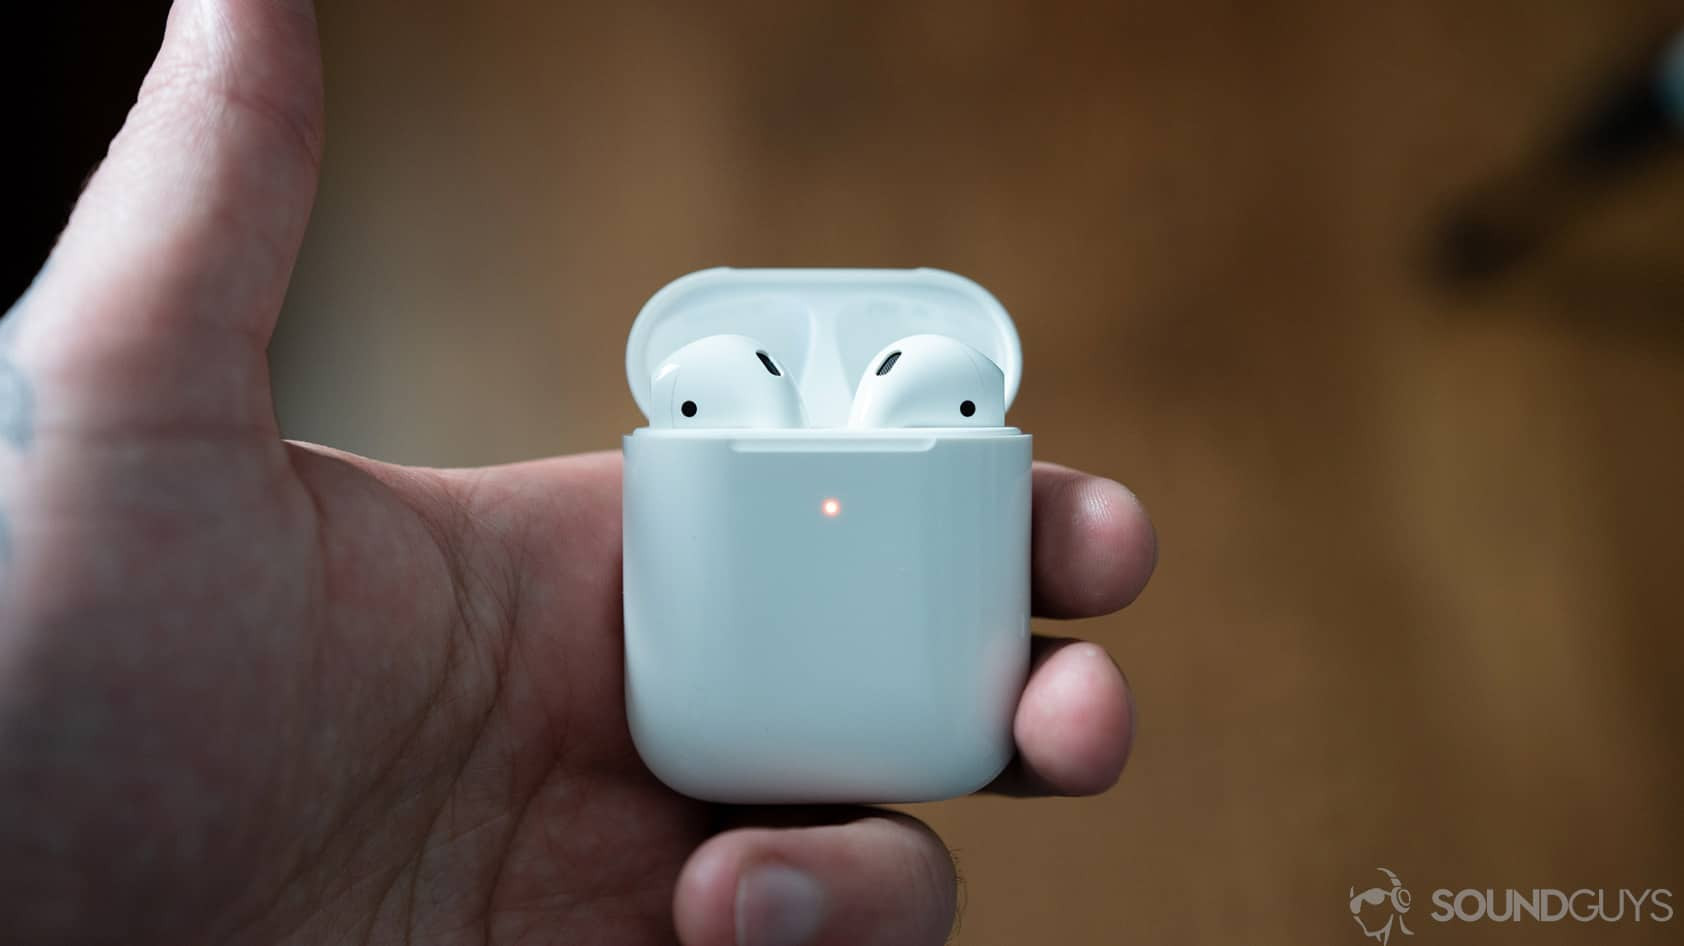 A picture of the AirPods 2 in wireless charging case held by man's hand.